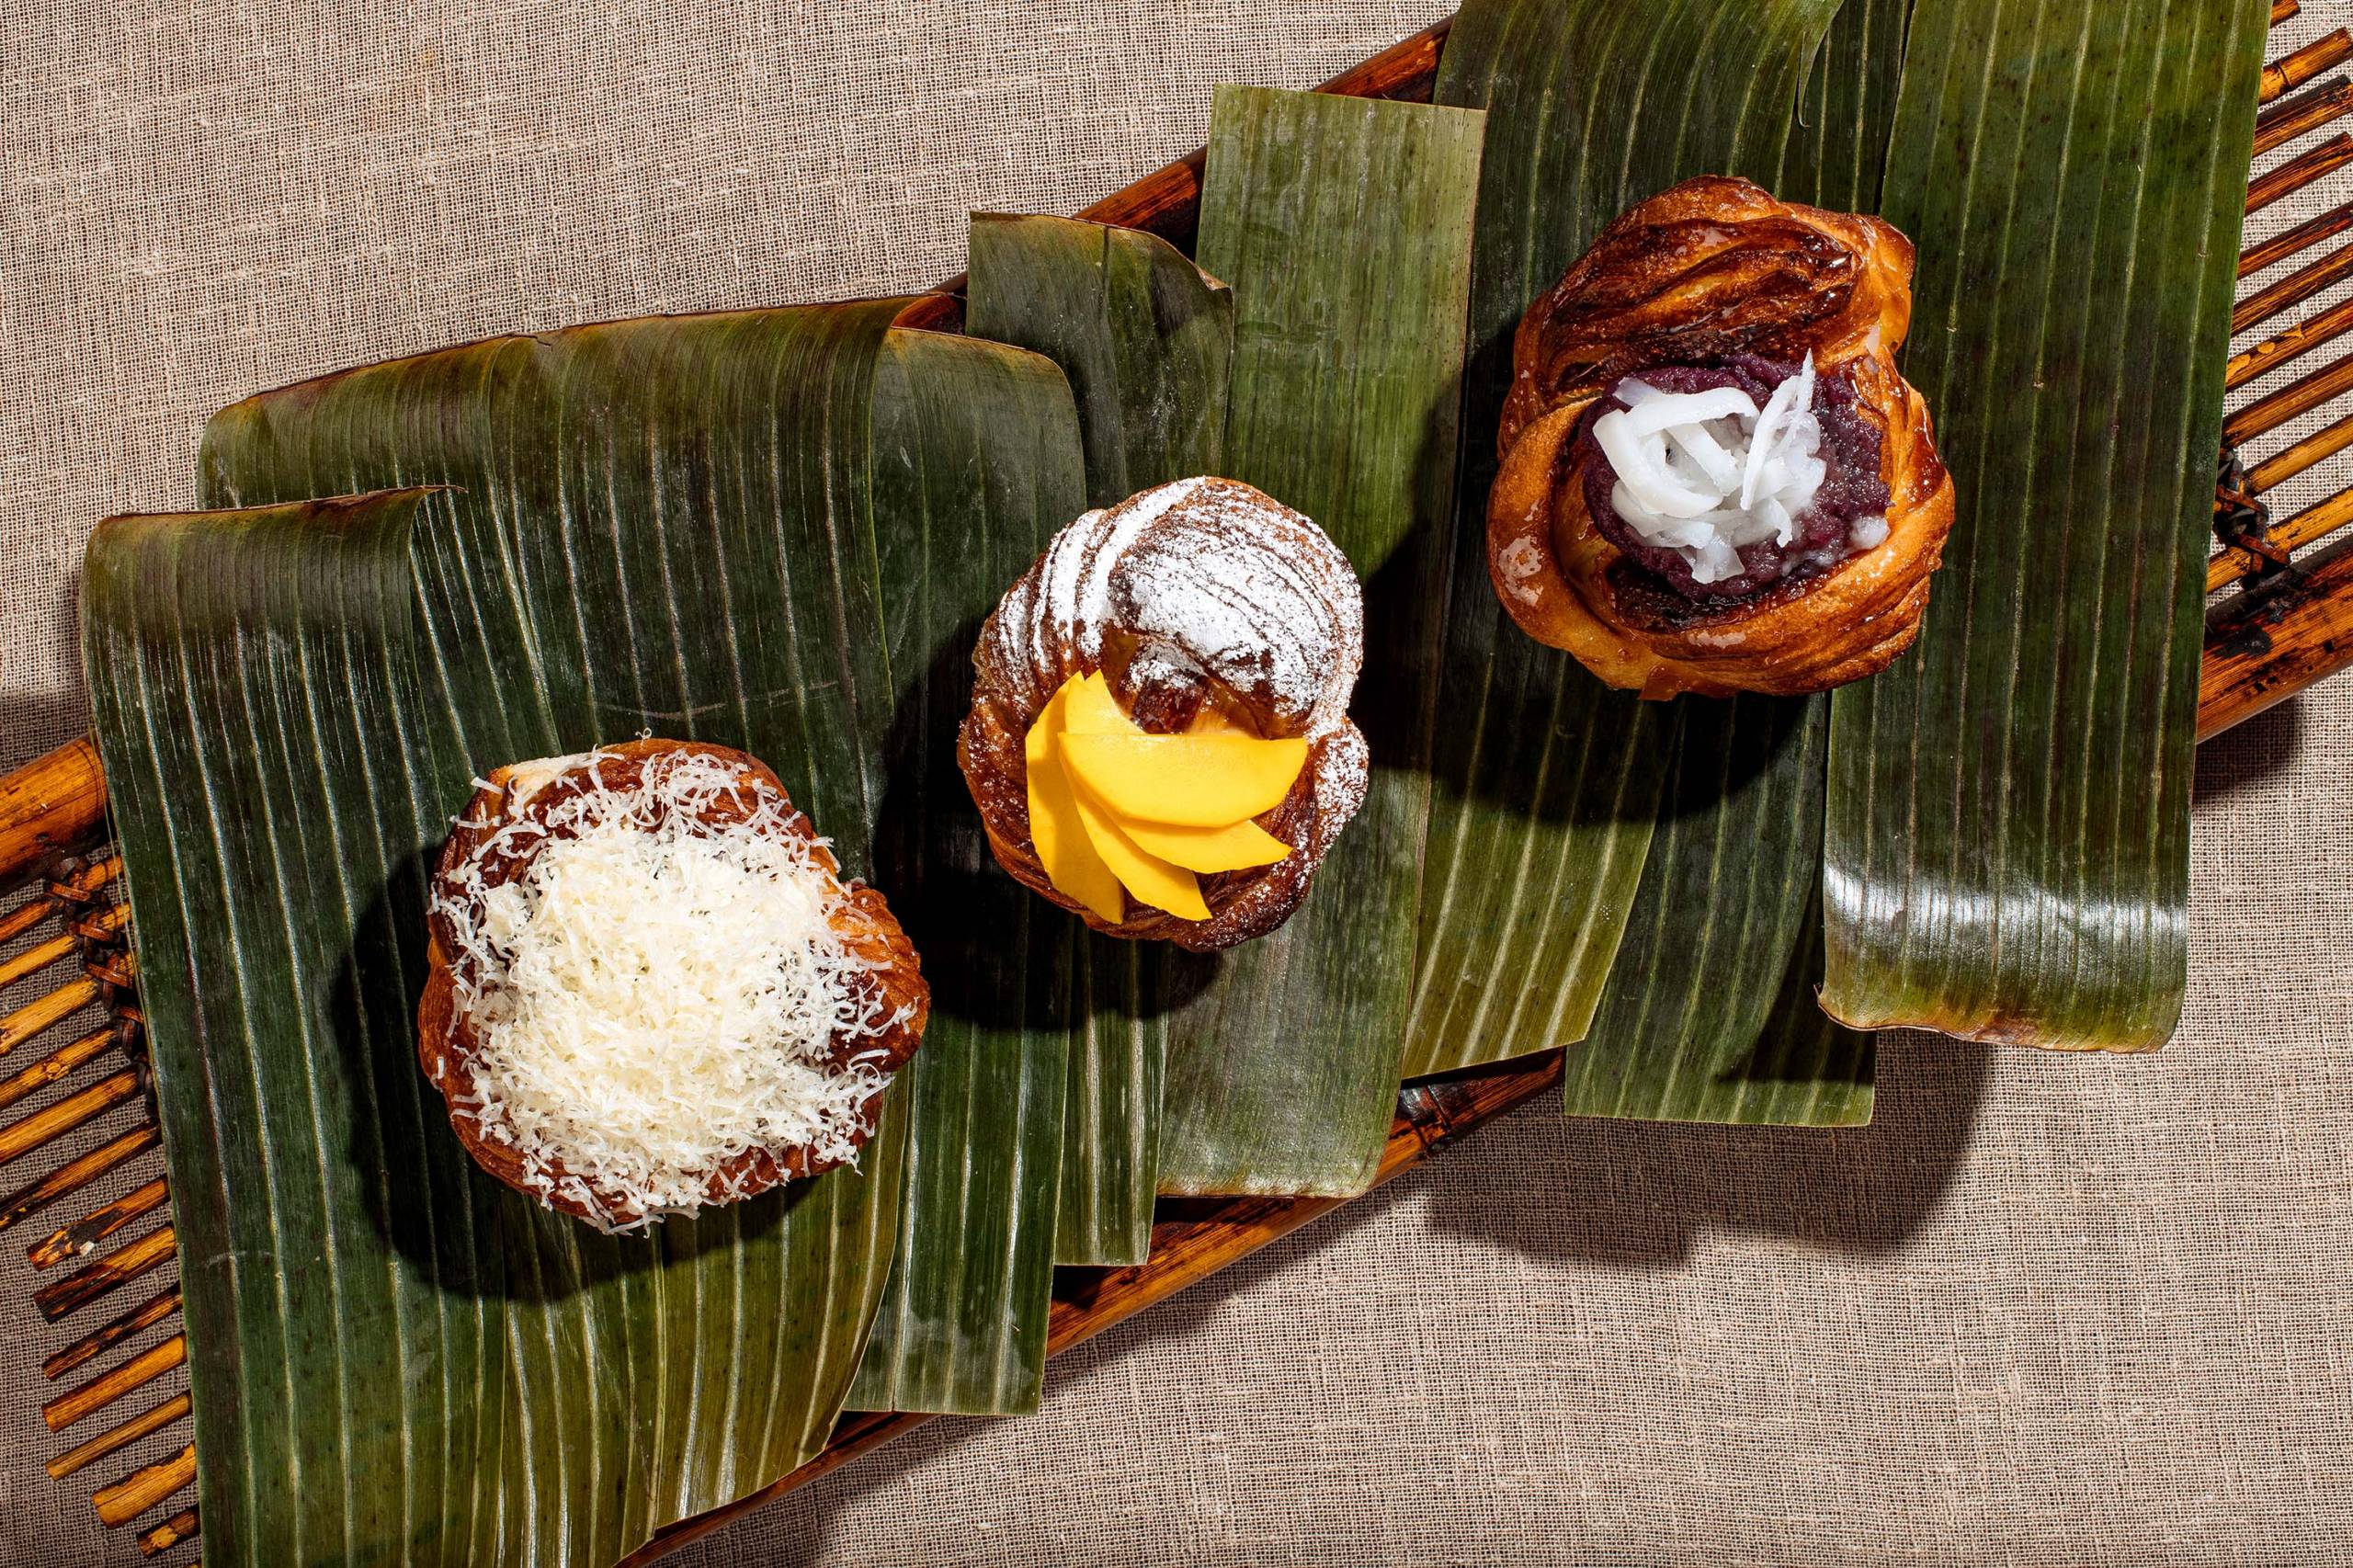 A trio of Filipino pastries, plated on top of banana leaves